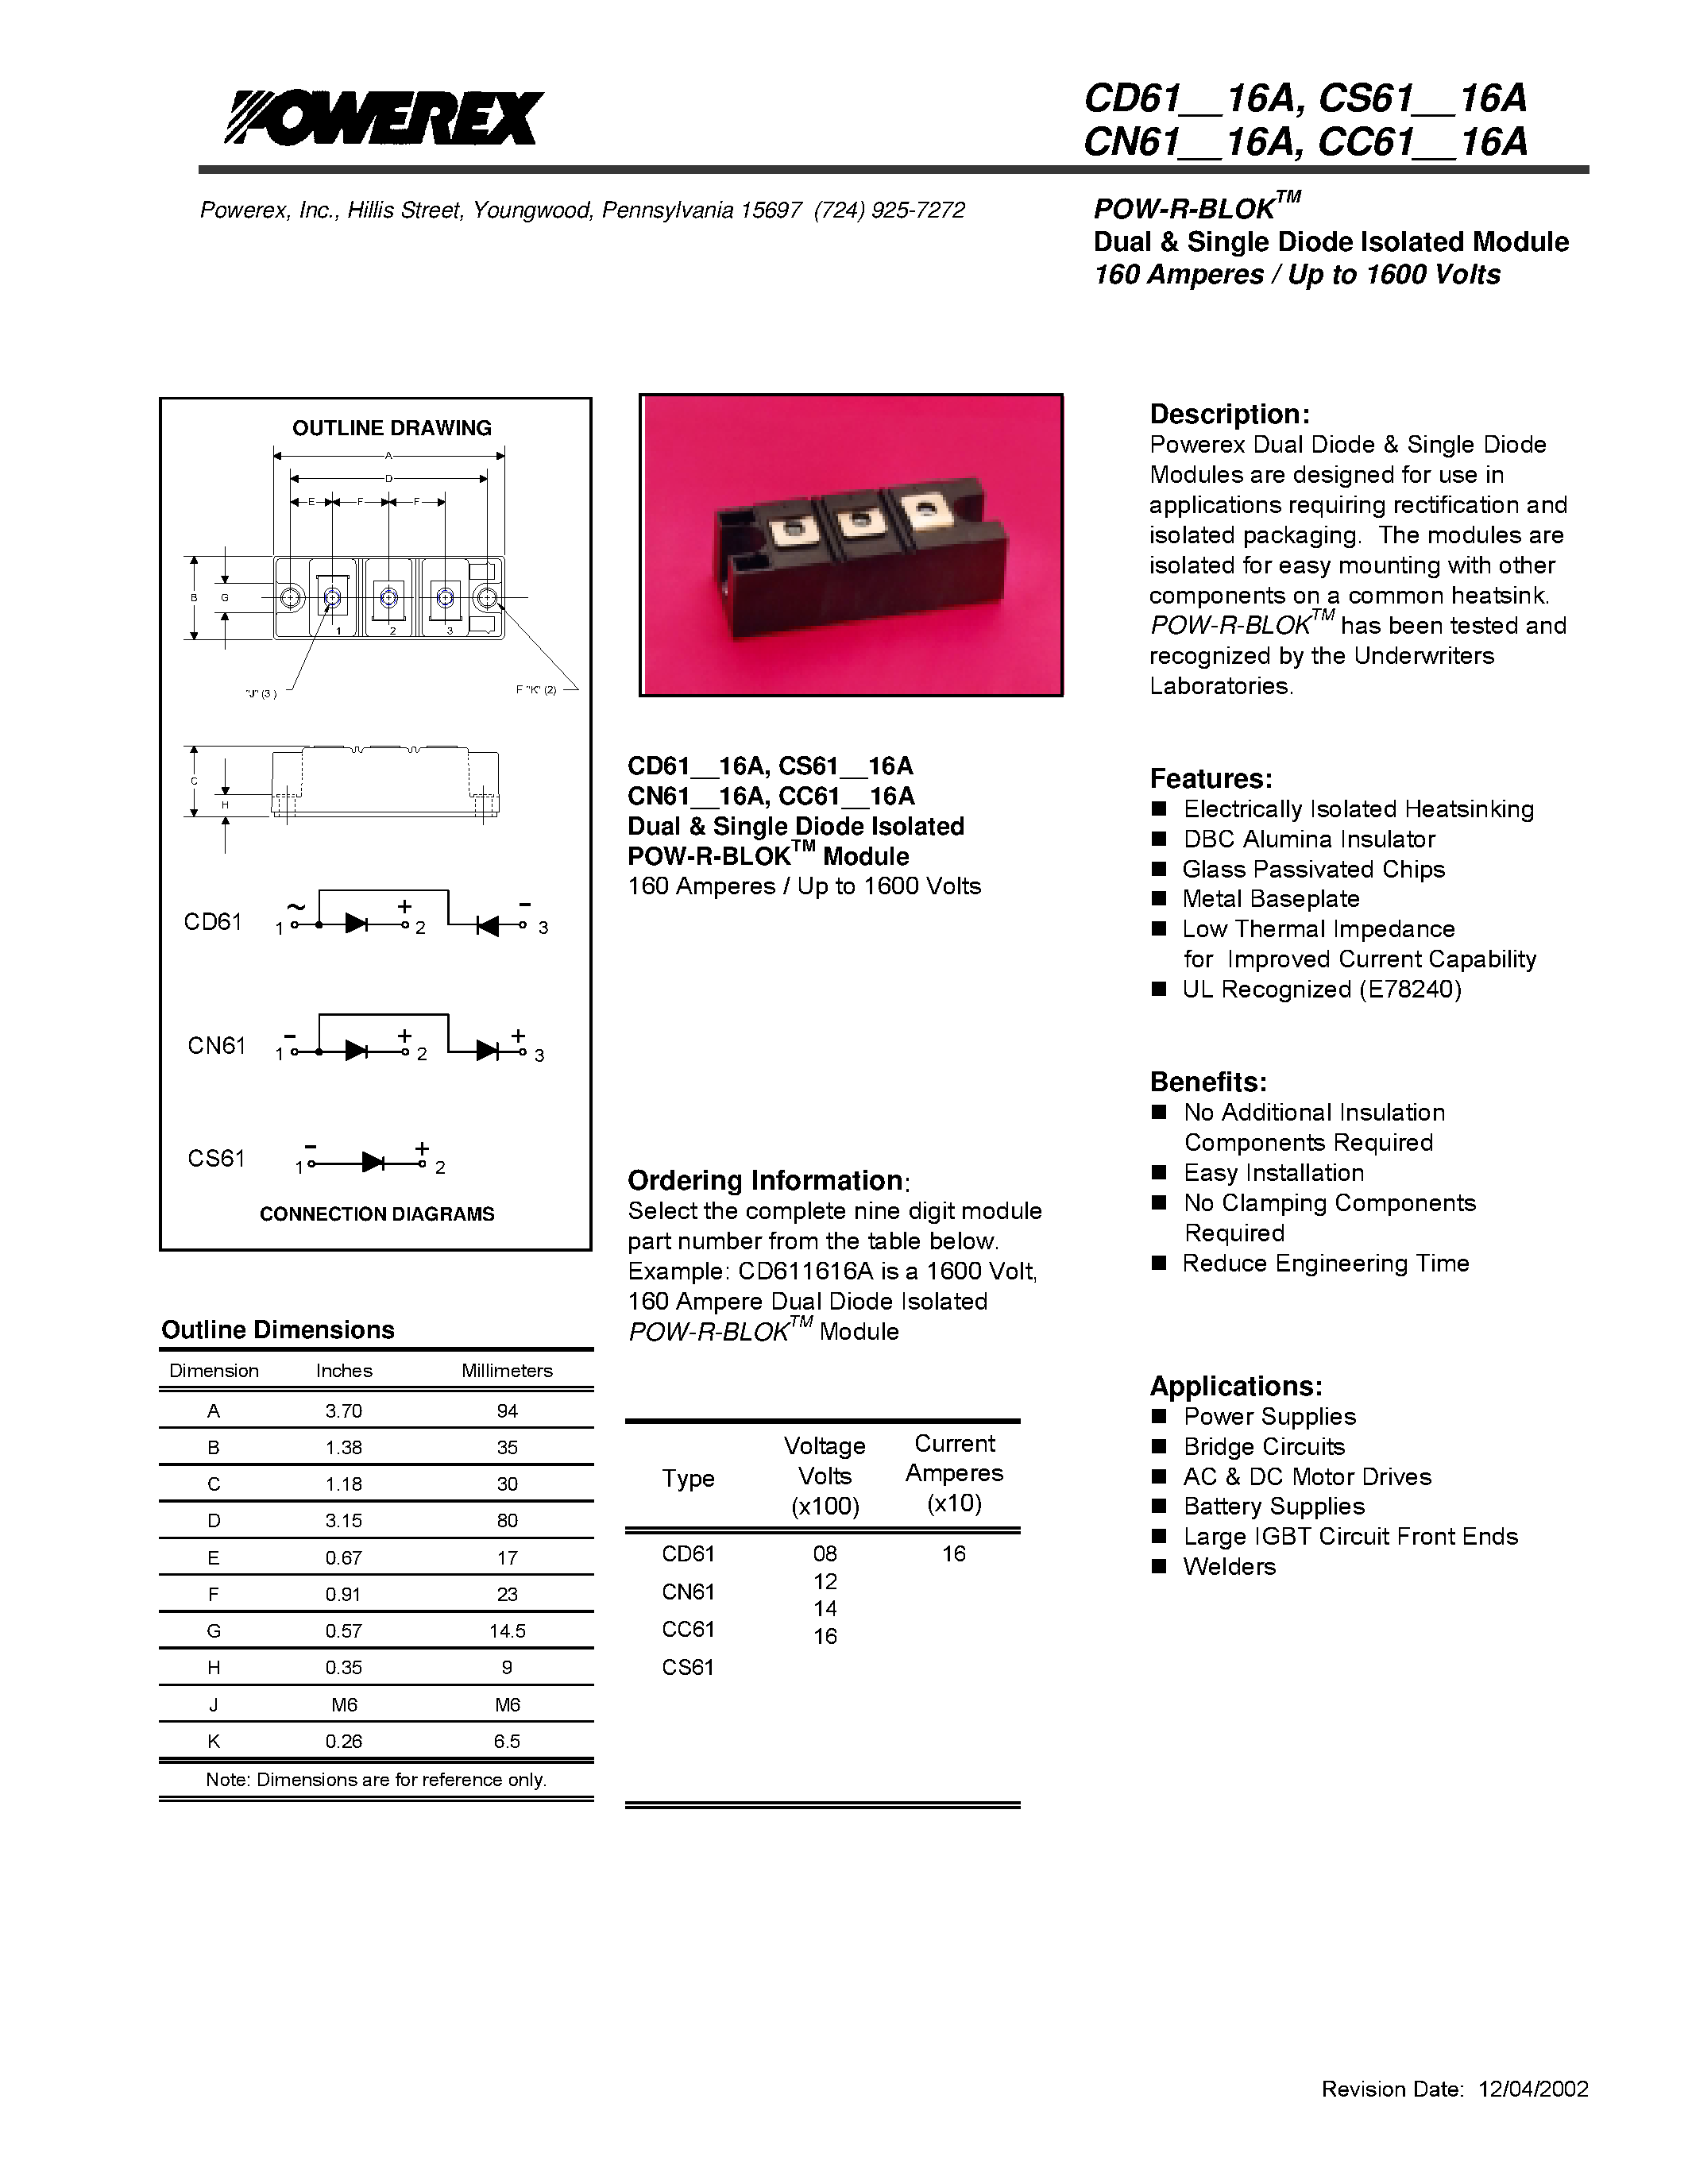 Datasheet CD611216 - POW-R-BLOK Dual & Single Diode Isolated Module 160 Amperes / Up to 1600 Volts page 1